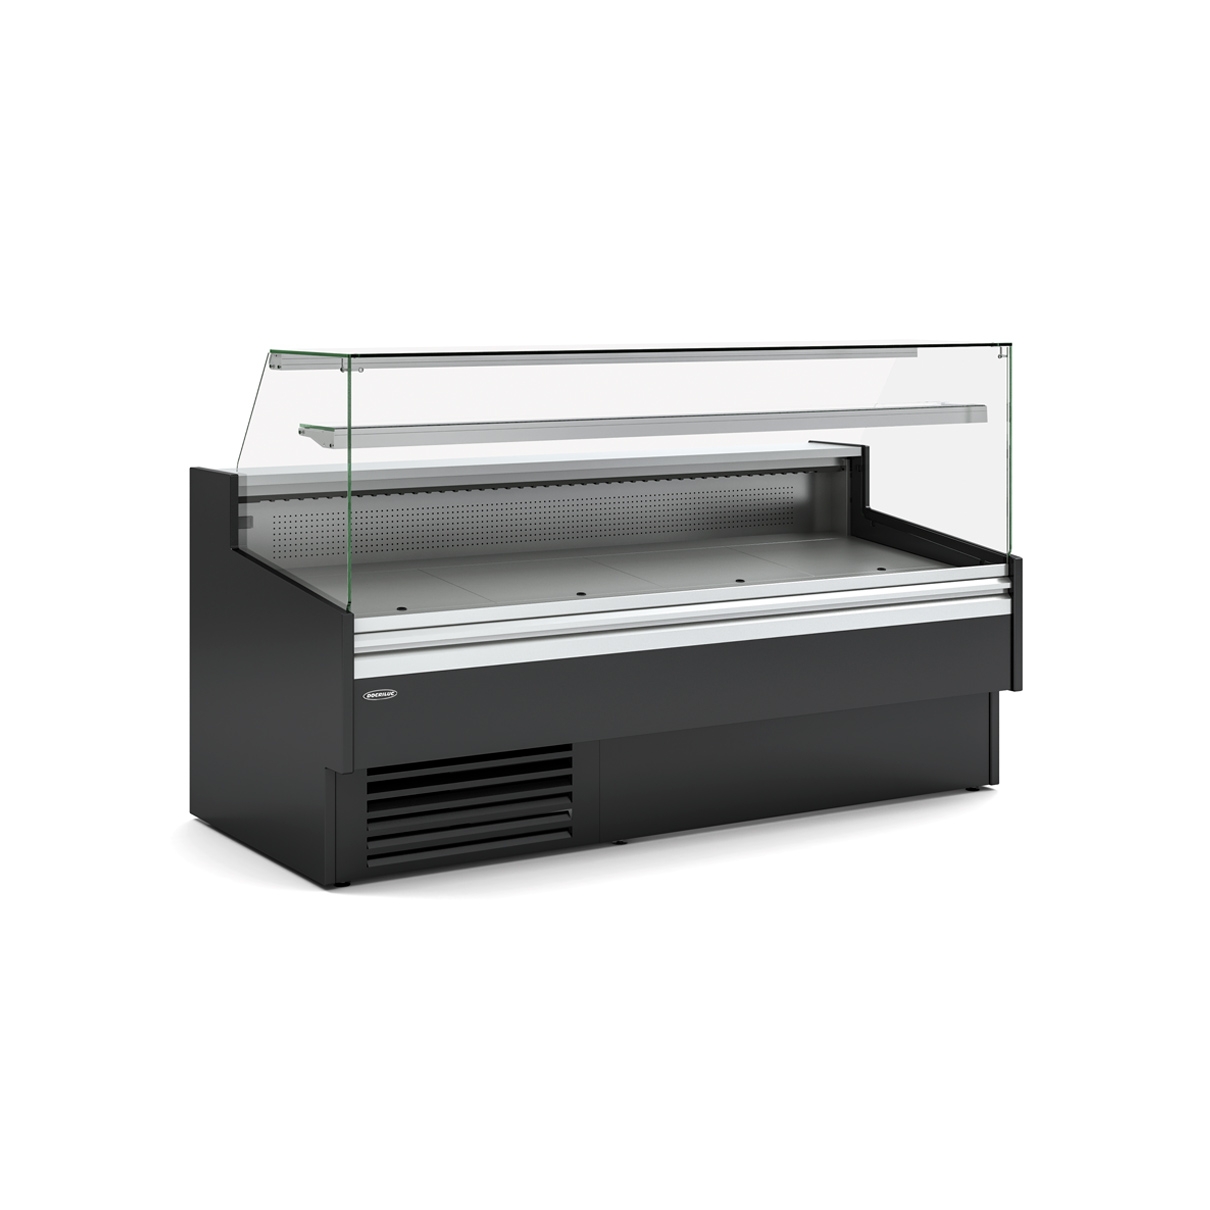 Refrigerated Display Case VEL-9-RR-TF